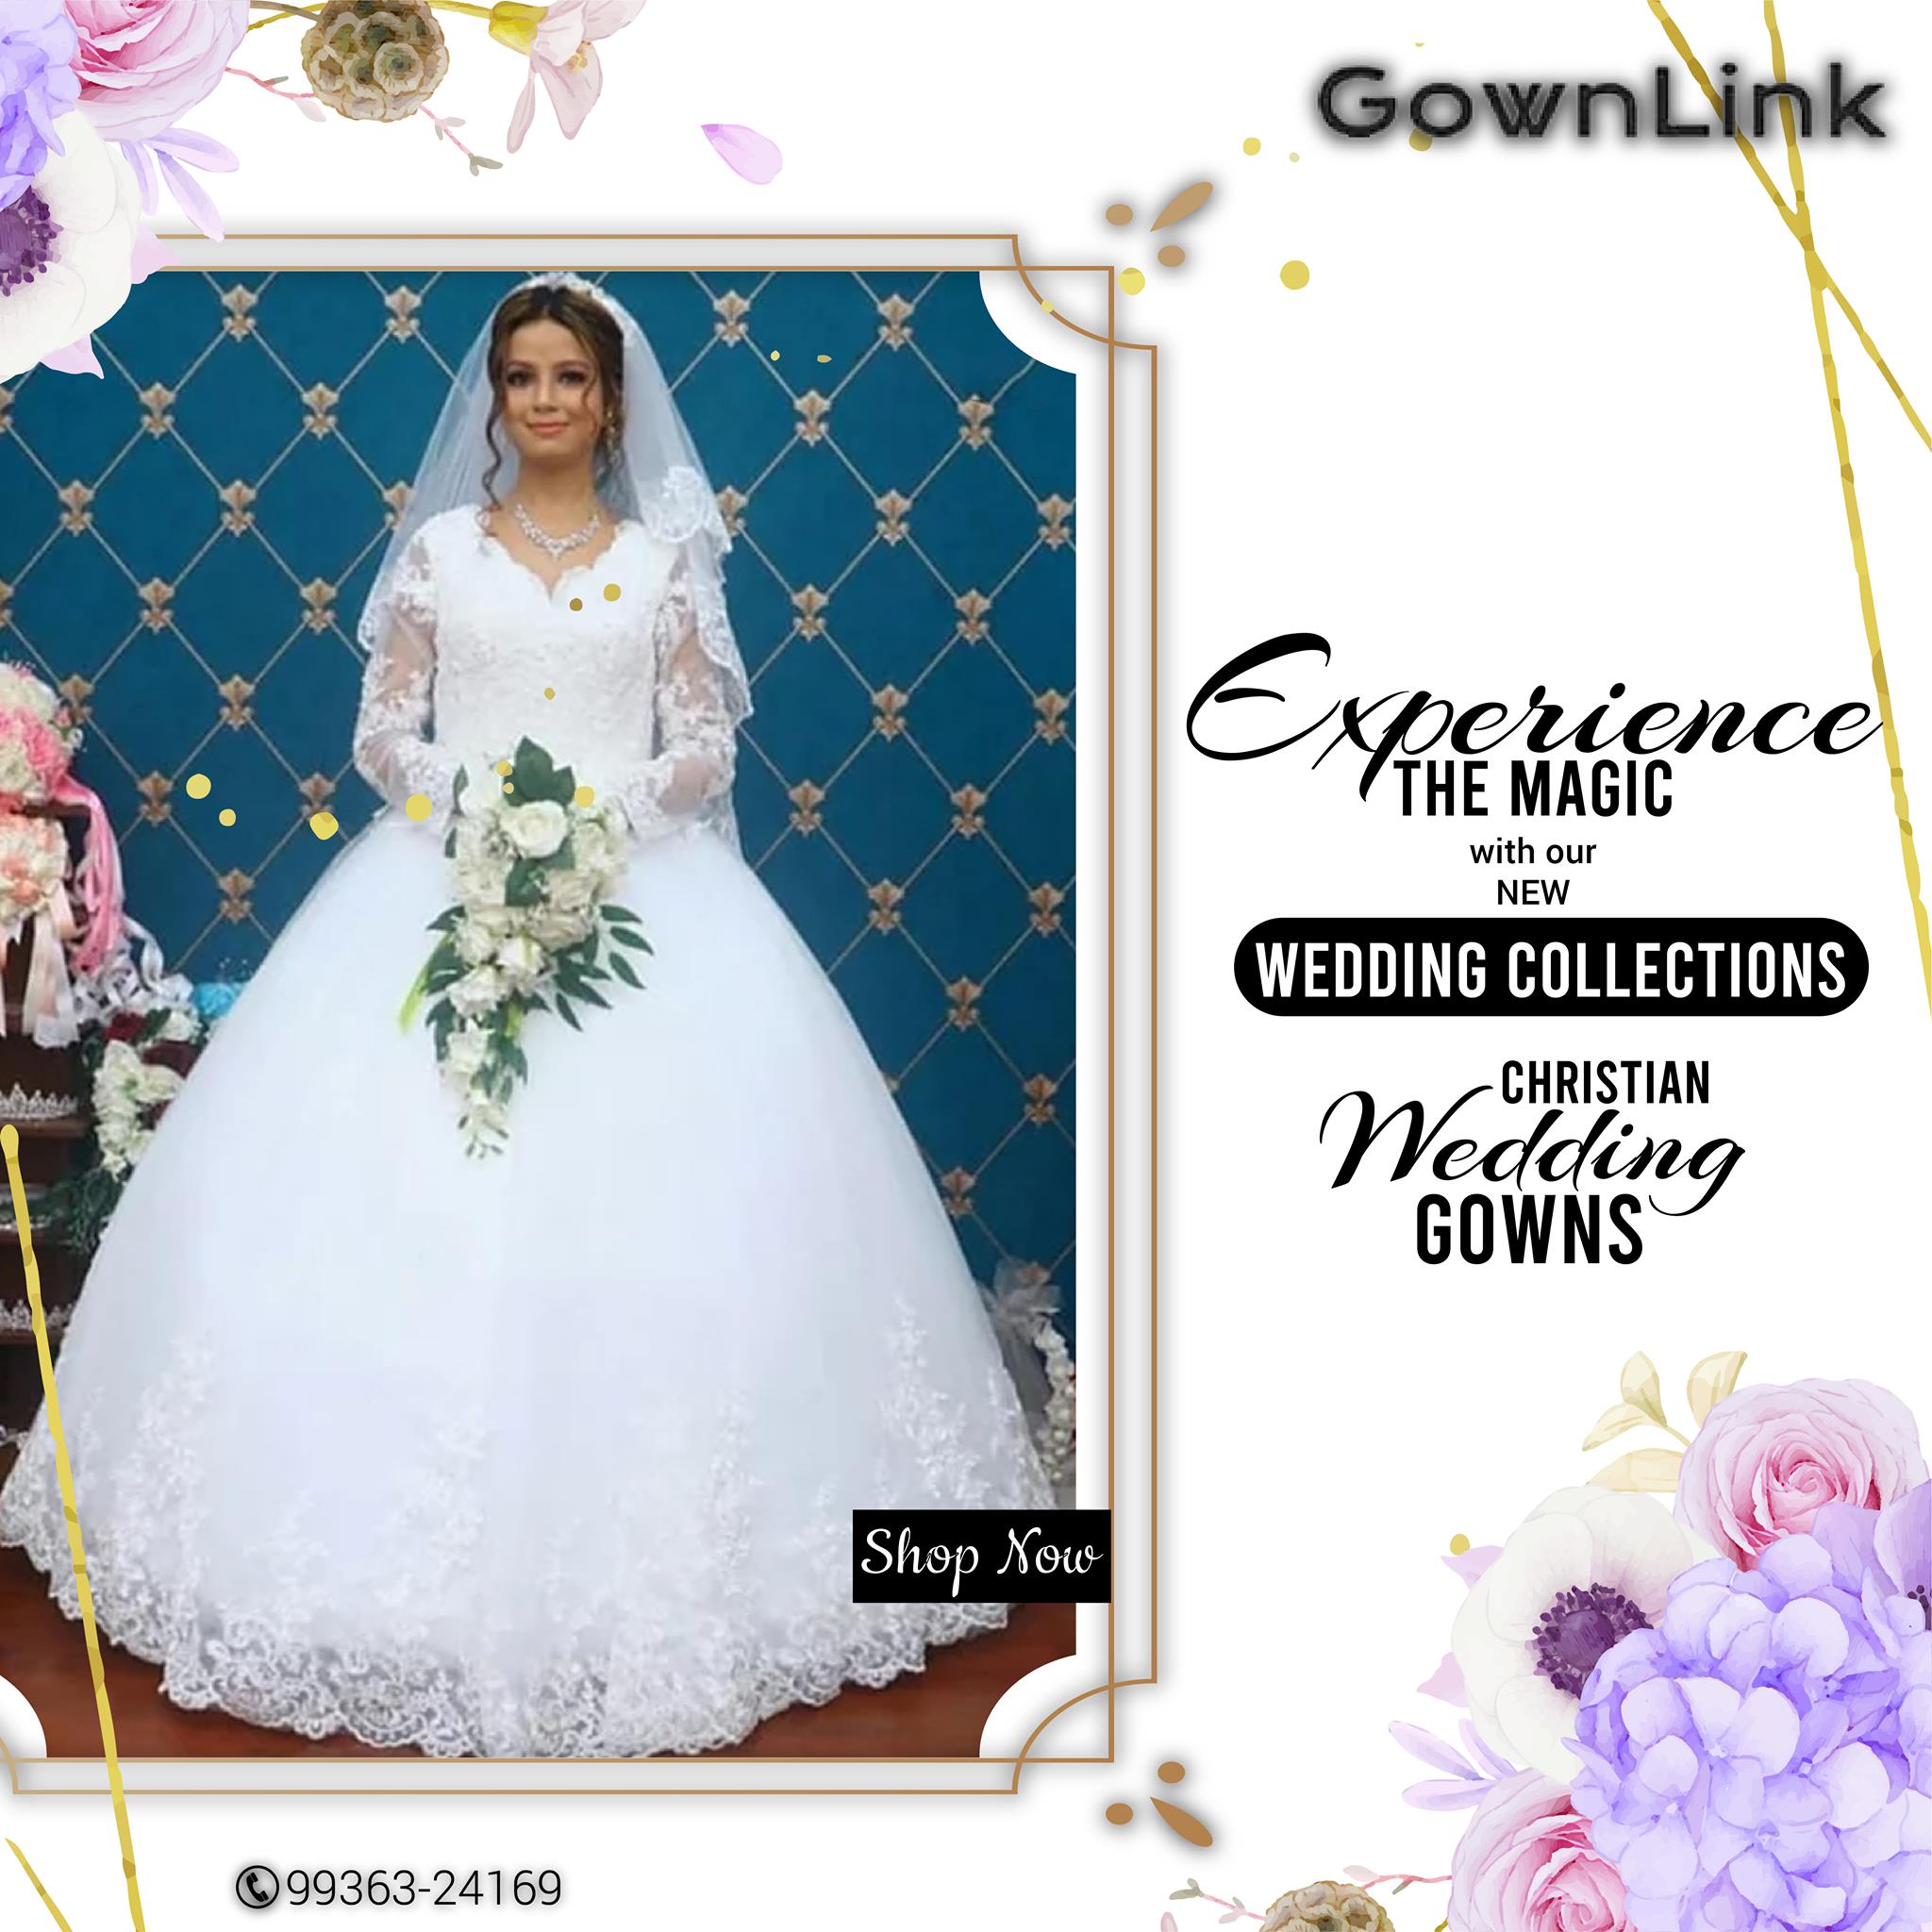 Best Christian Wedding Gowns | Christian Wedding Gowns in India Online | Gownlink